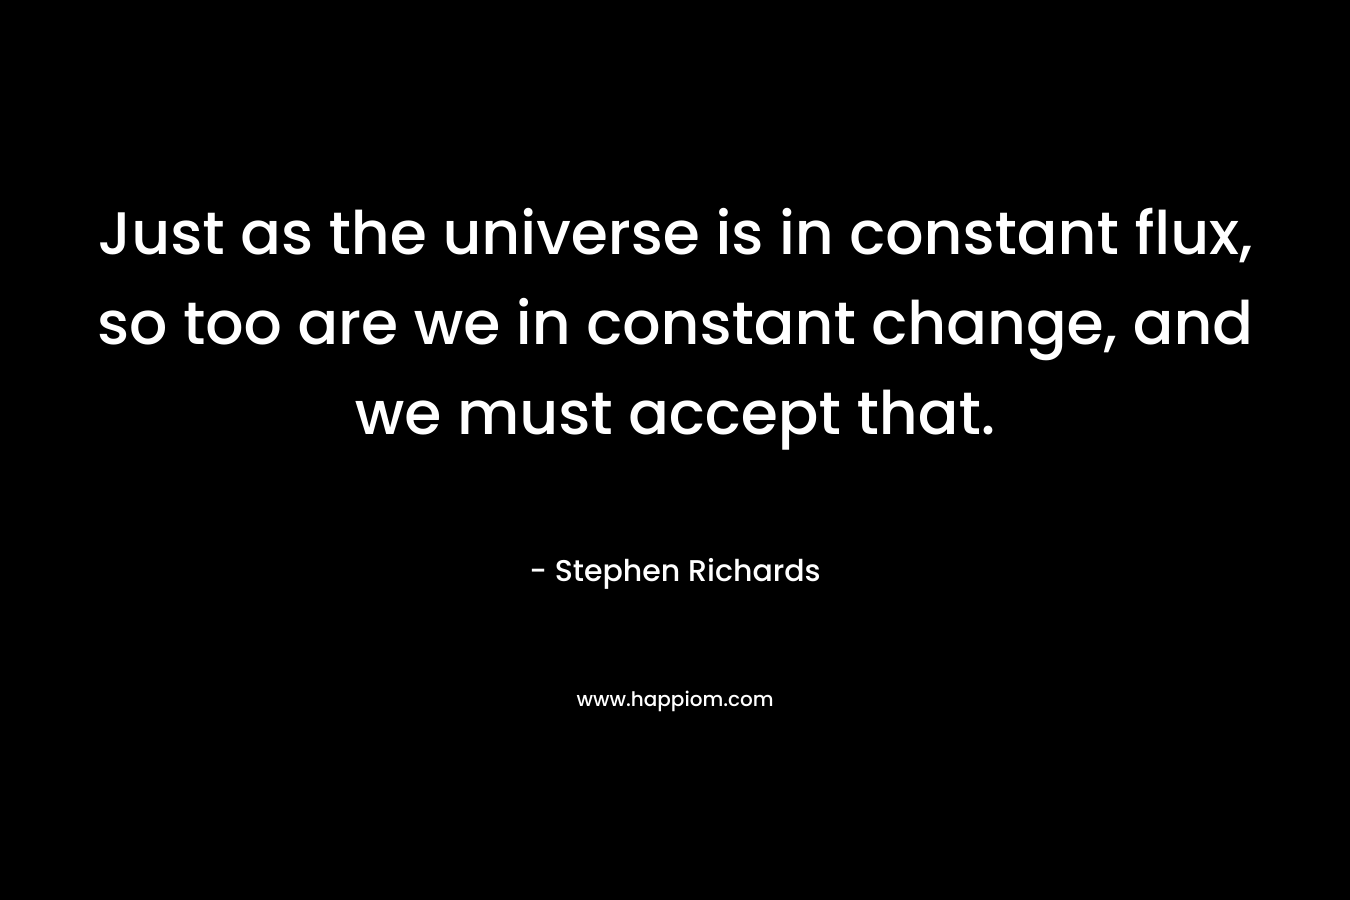 Just as the universe is in constant flux, so too are we in constant change, and we must accept that.